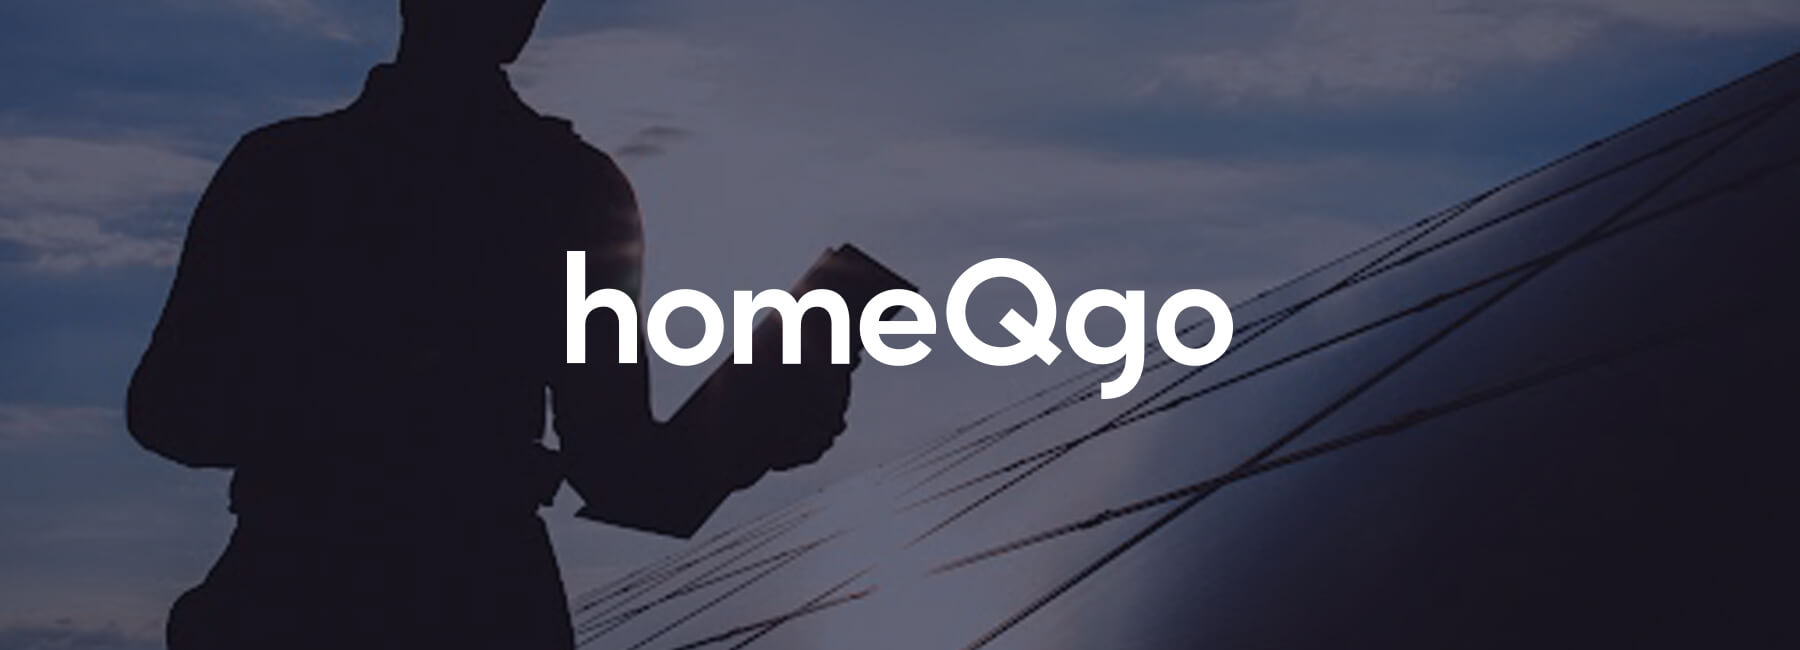 homeQgo taps into the online customer journey with user feedback